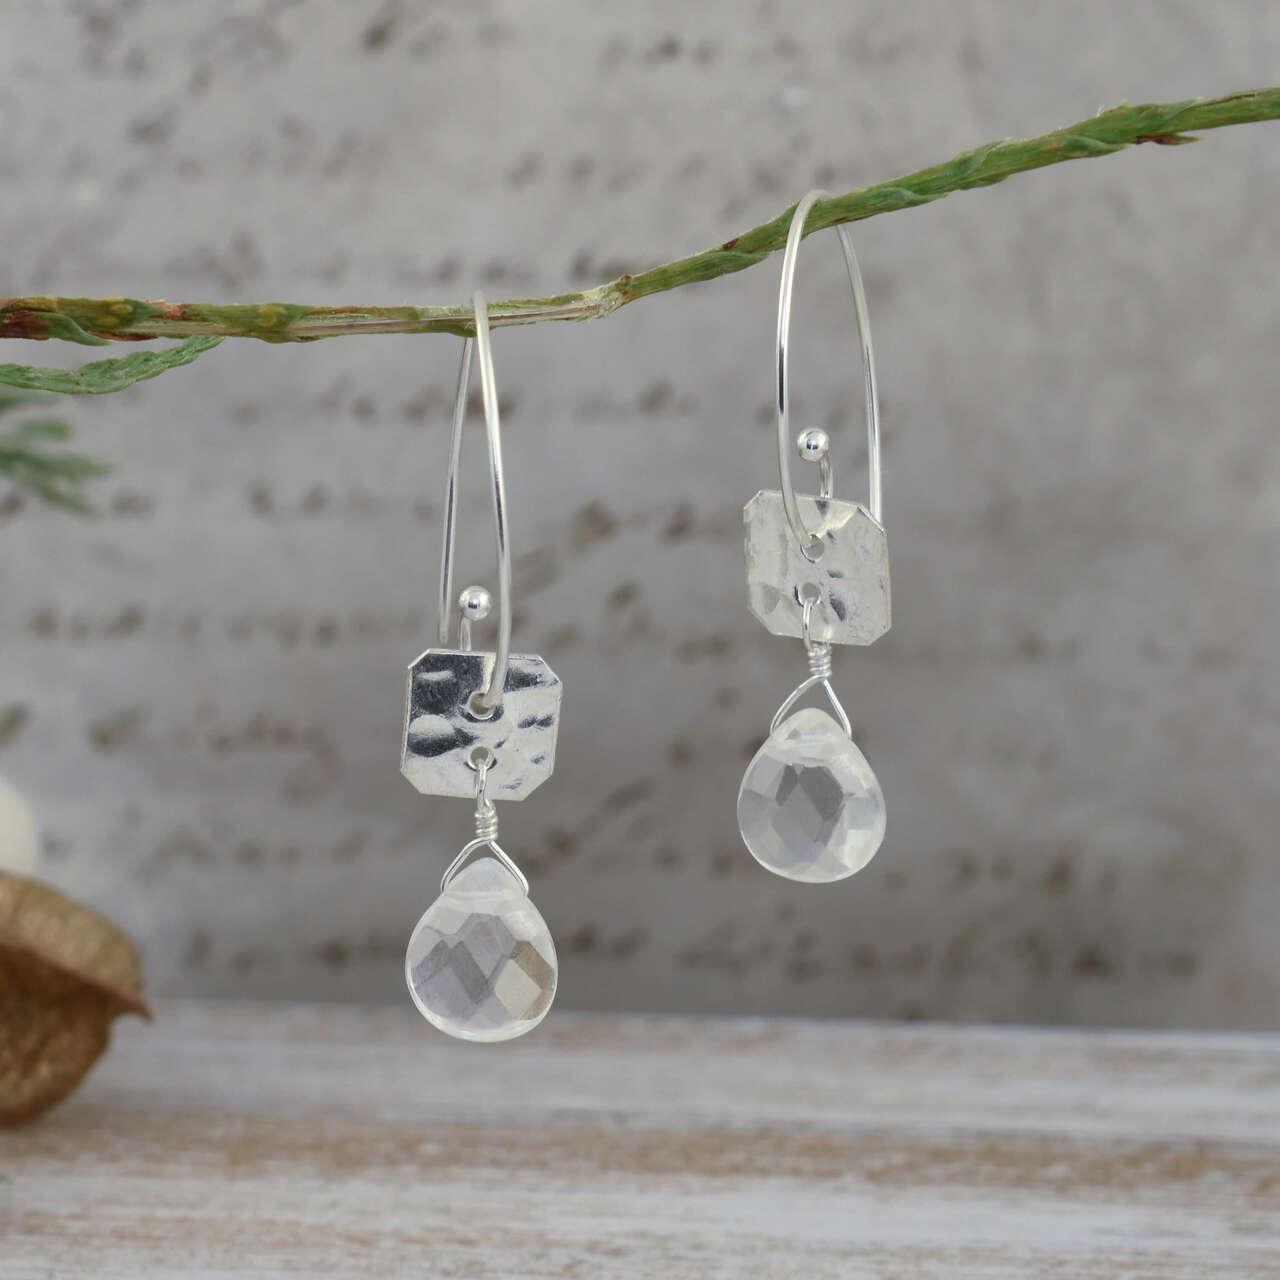 Handcrafted sterling silver and clear crystal earrings with wire hooks